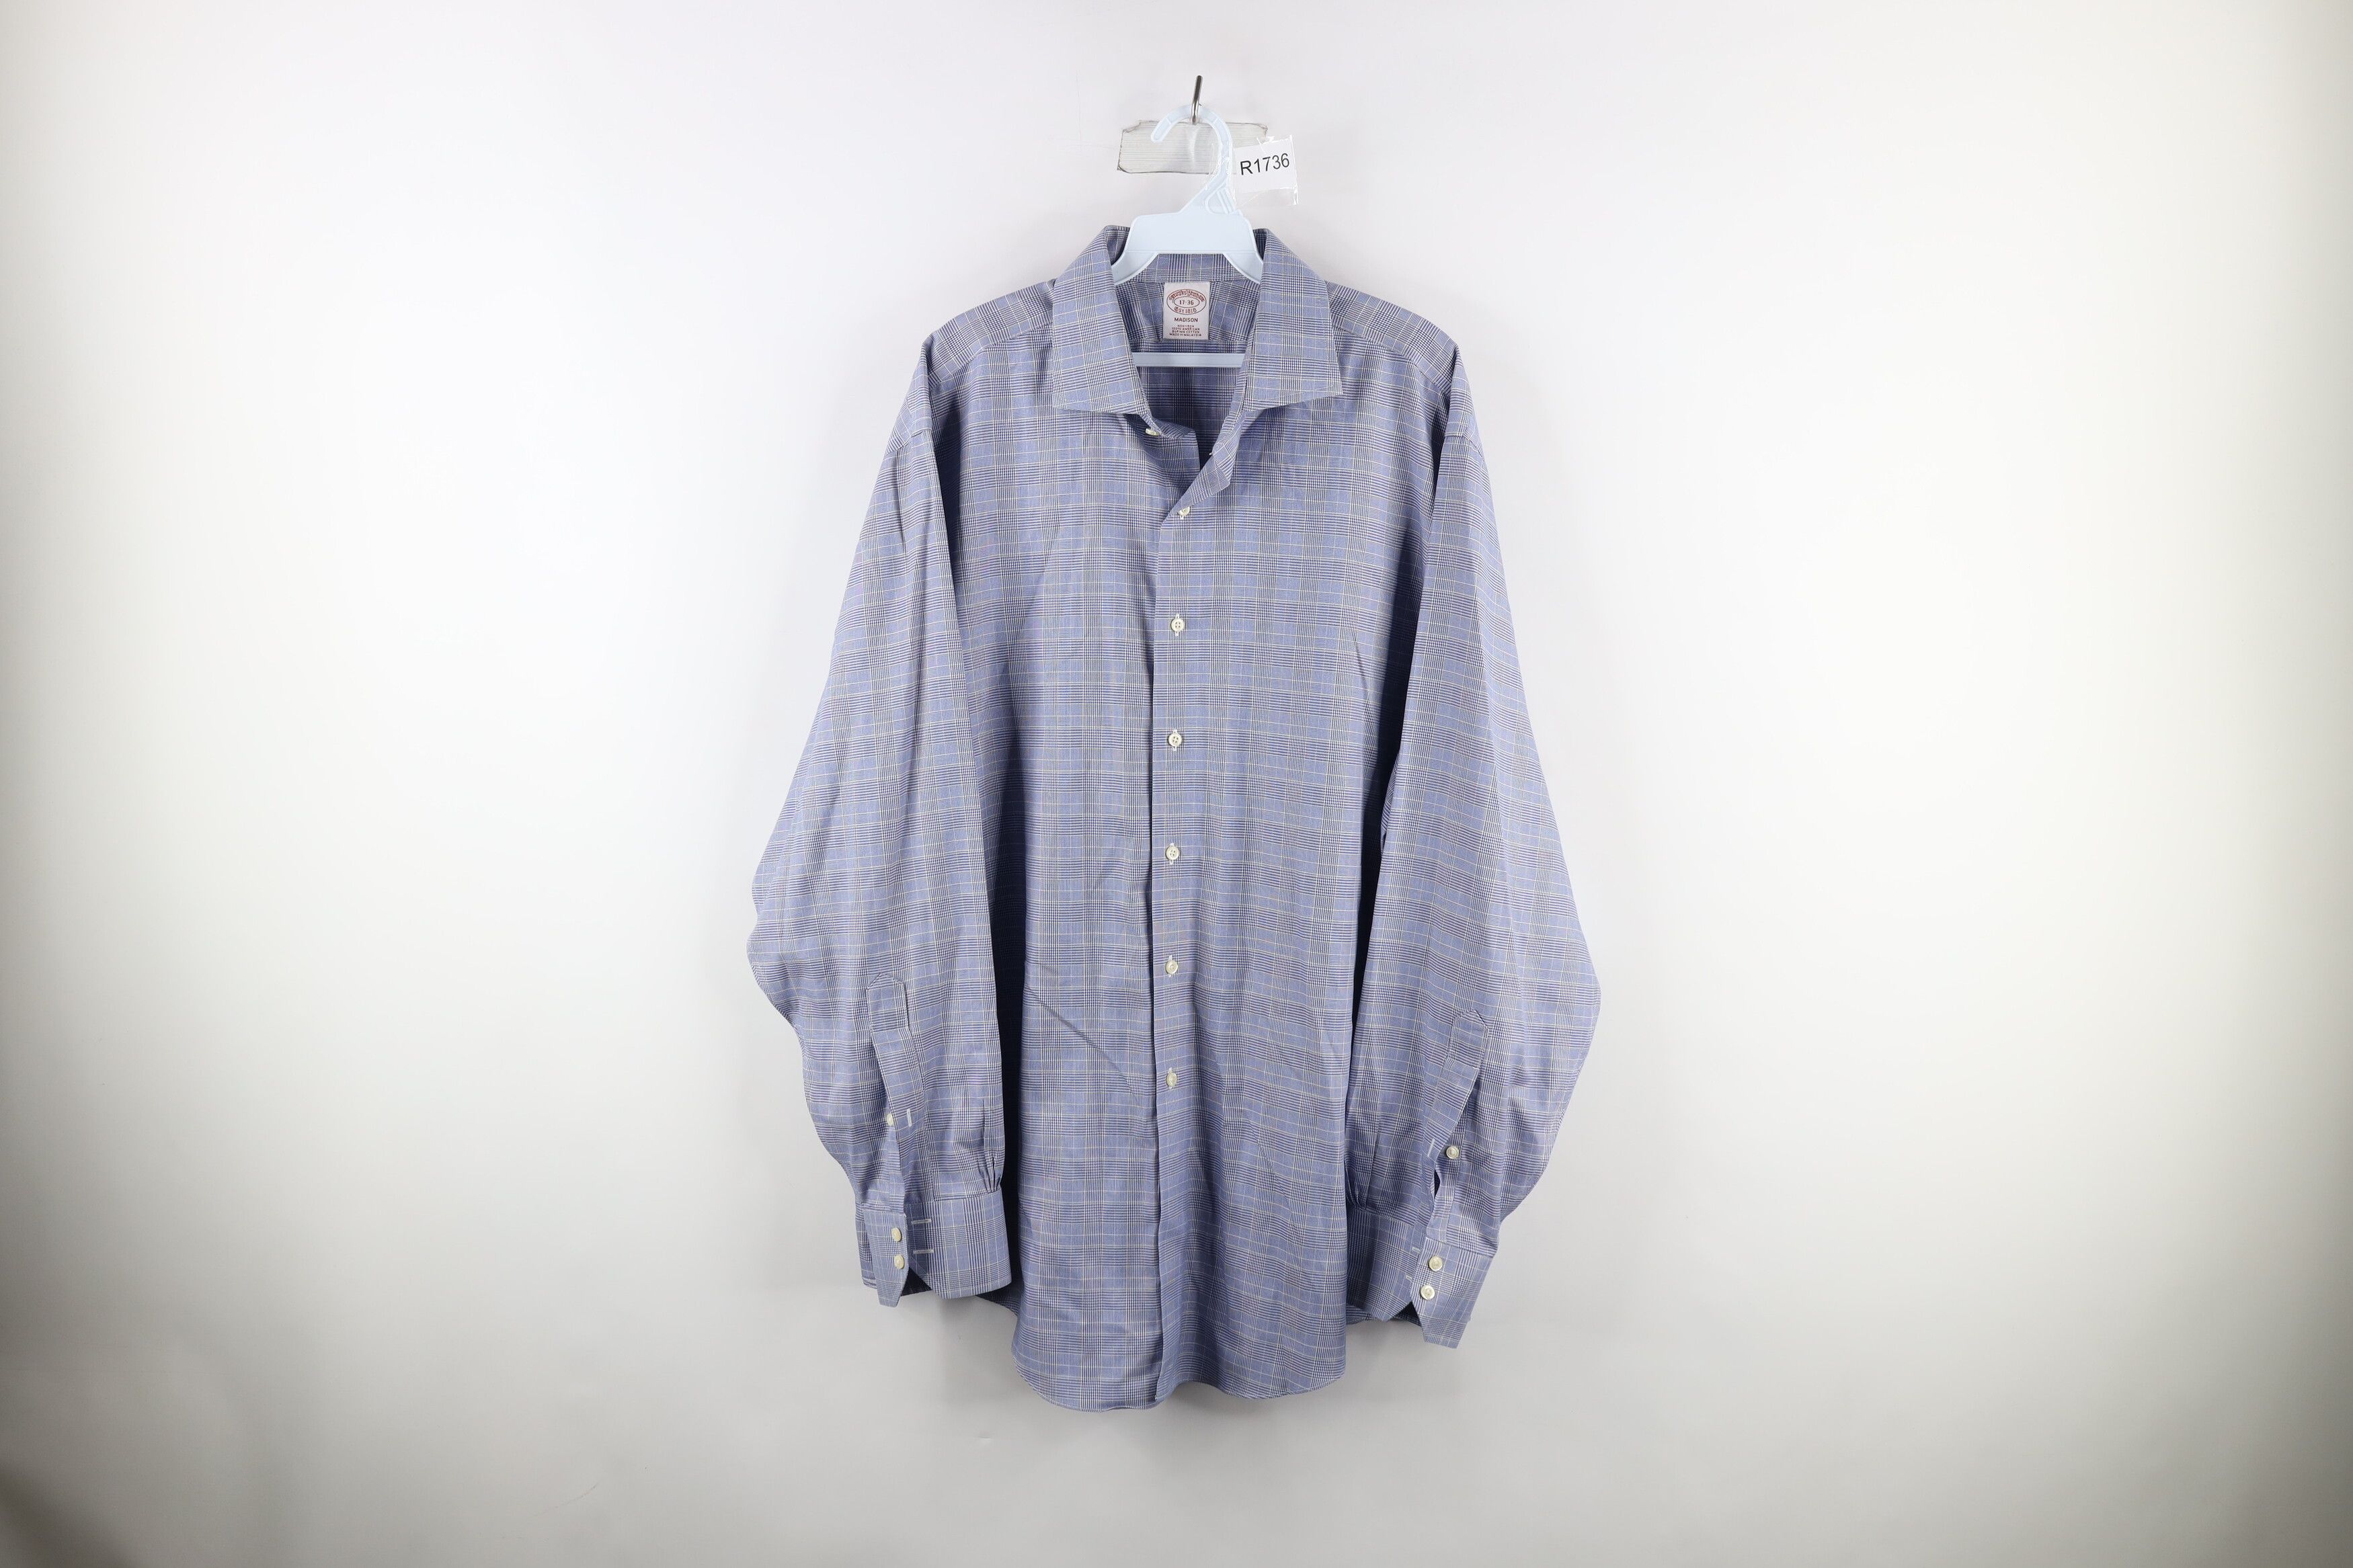 Vintage Vintage 90s Brooks Brothers Non Iron Collared Button Shirt Size US M / EU 48-50 / 2 - 1 Preview